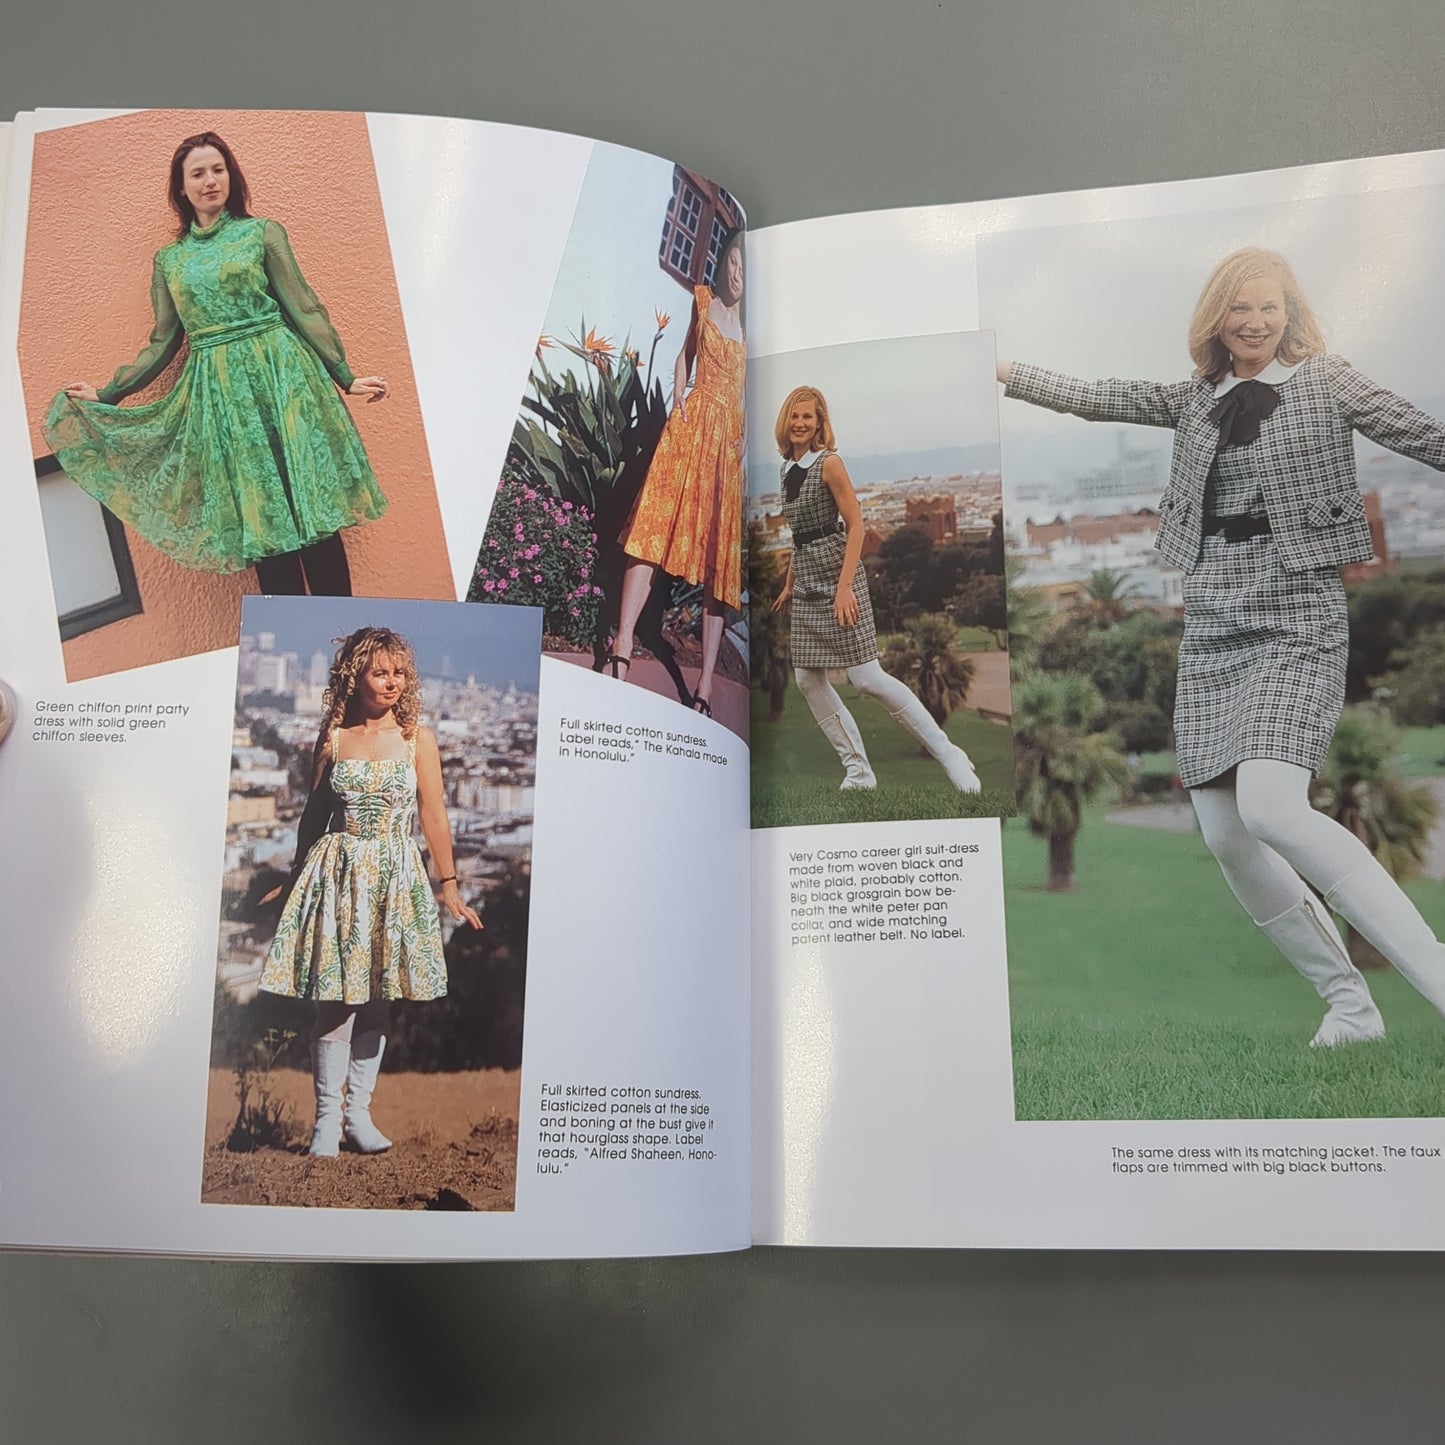 Tomorrow's Heirlooms: Fashions of the 60s & 70s